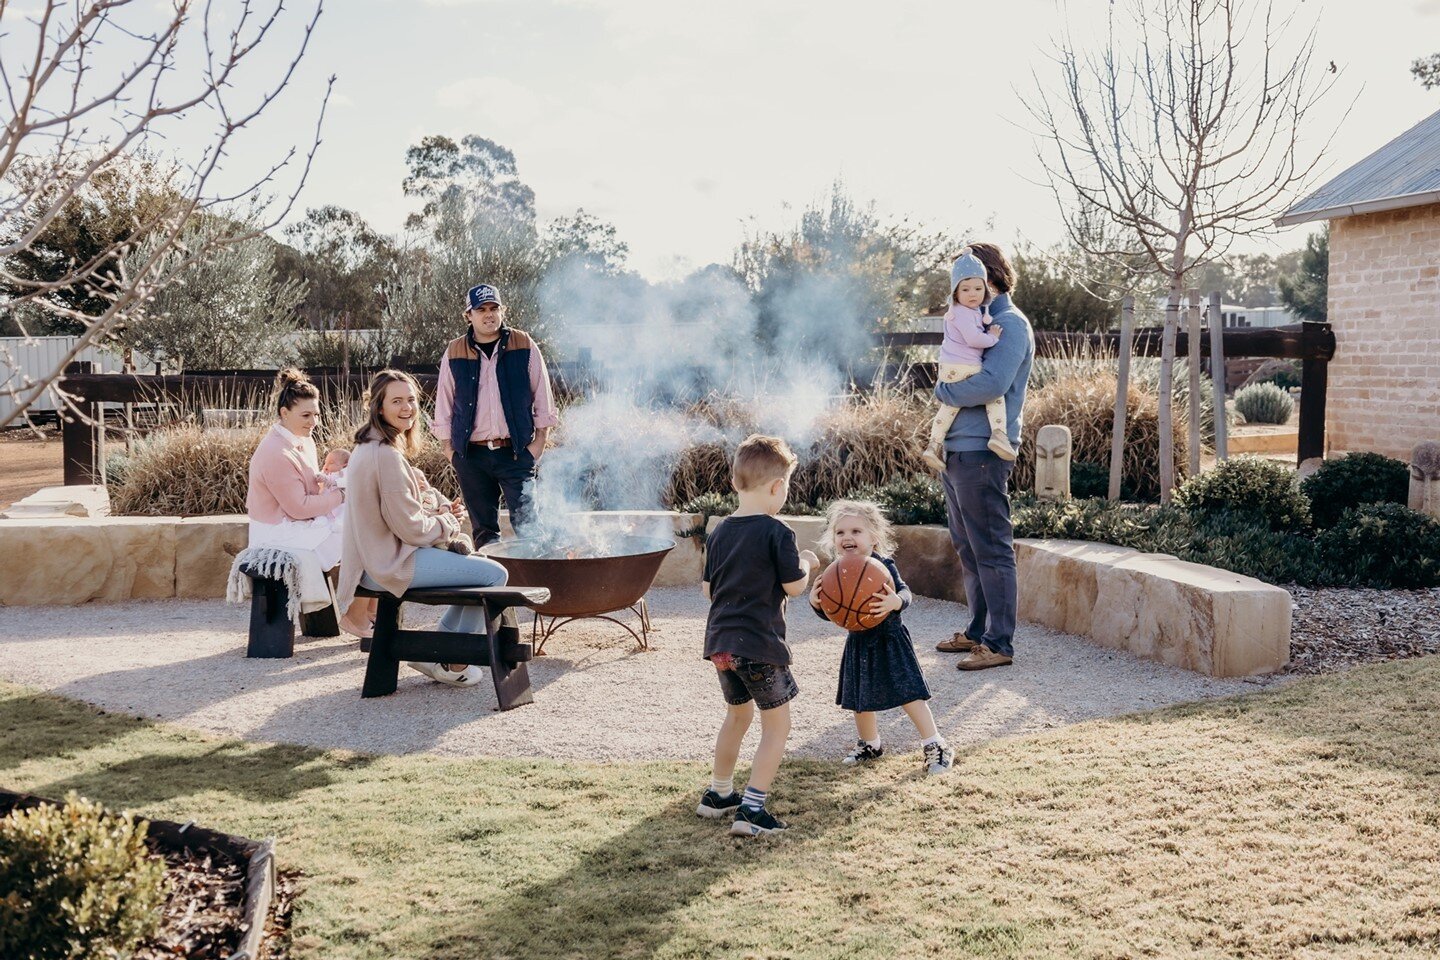 Is there anything better than hosting your friends and family in your own backyard? ⁠
⁠
Make this your reality, call our agents today: ⁠
Richard Tegart 0418 634 868 @raywhitedubbo ⁠
Michael Redden 0409 844 036 @reddenfamily Real Estate ⁠
⁠
📸 : @copp